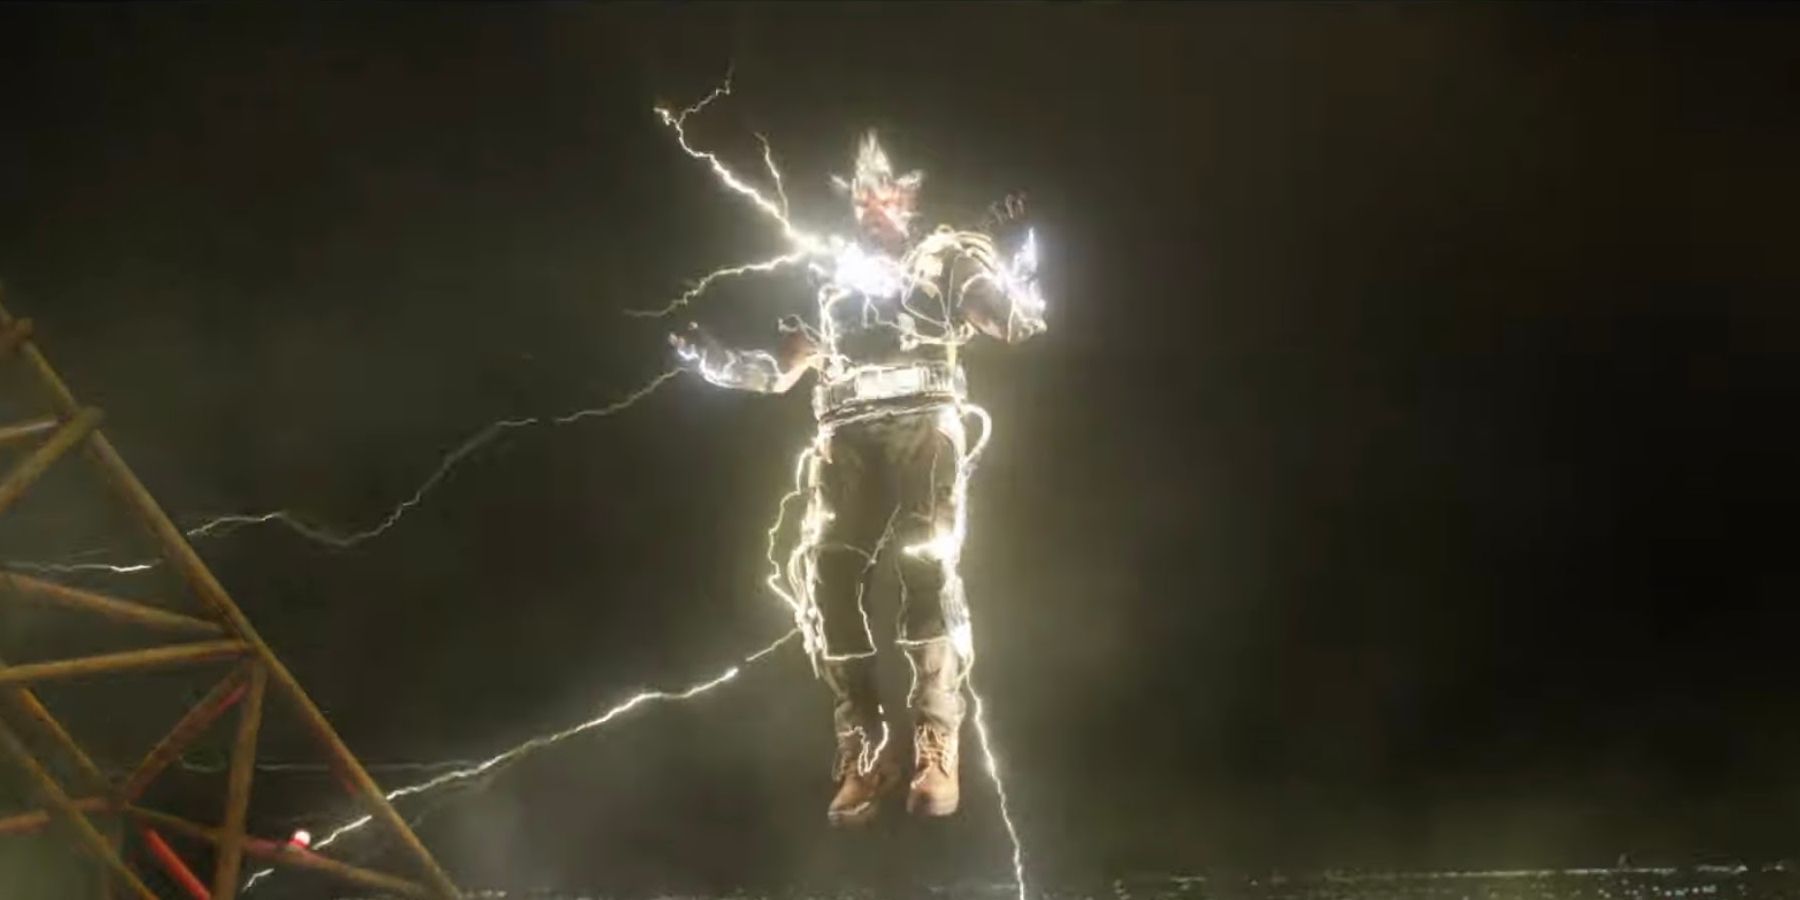 Electro surrounded by electricity in Spider-Man: No Way Home